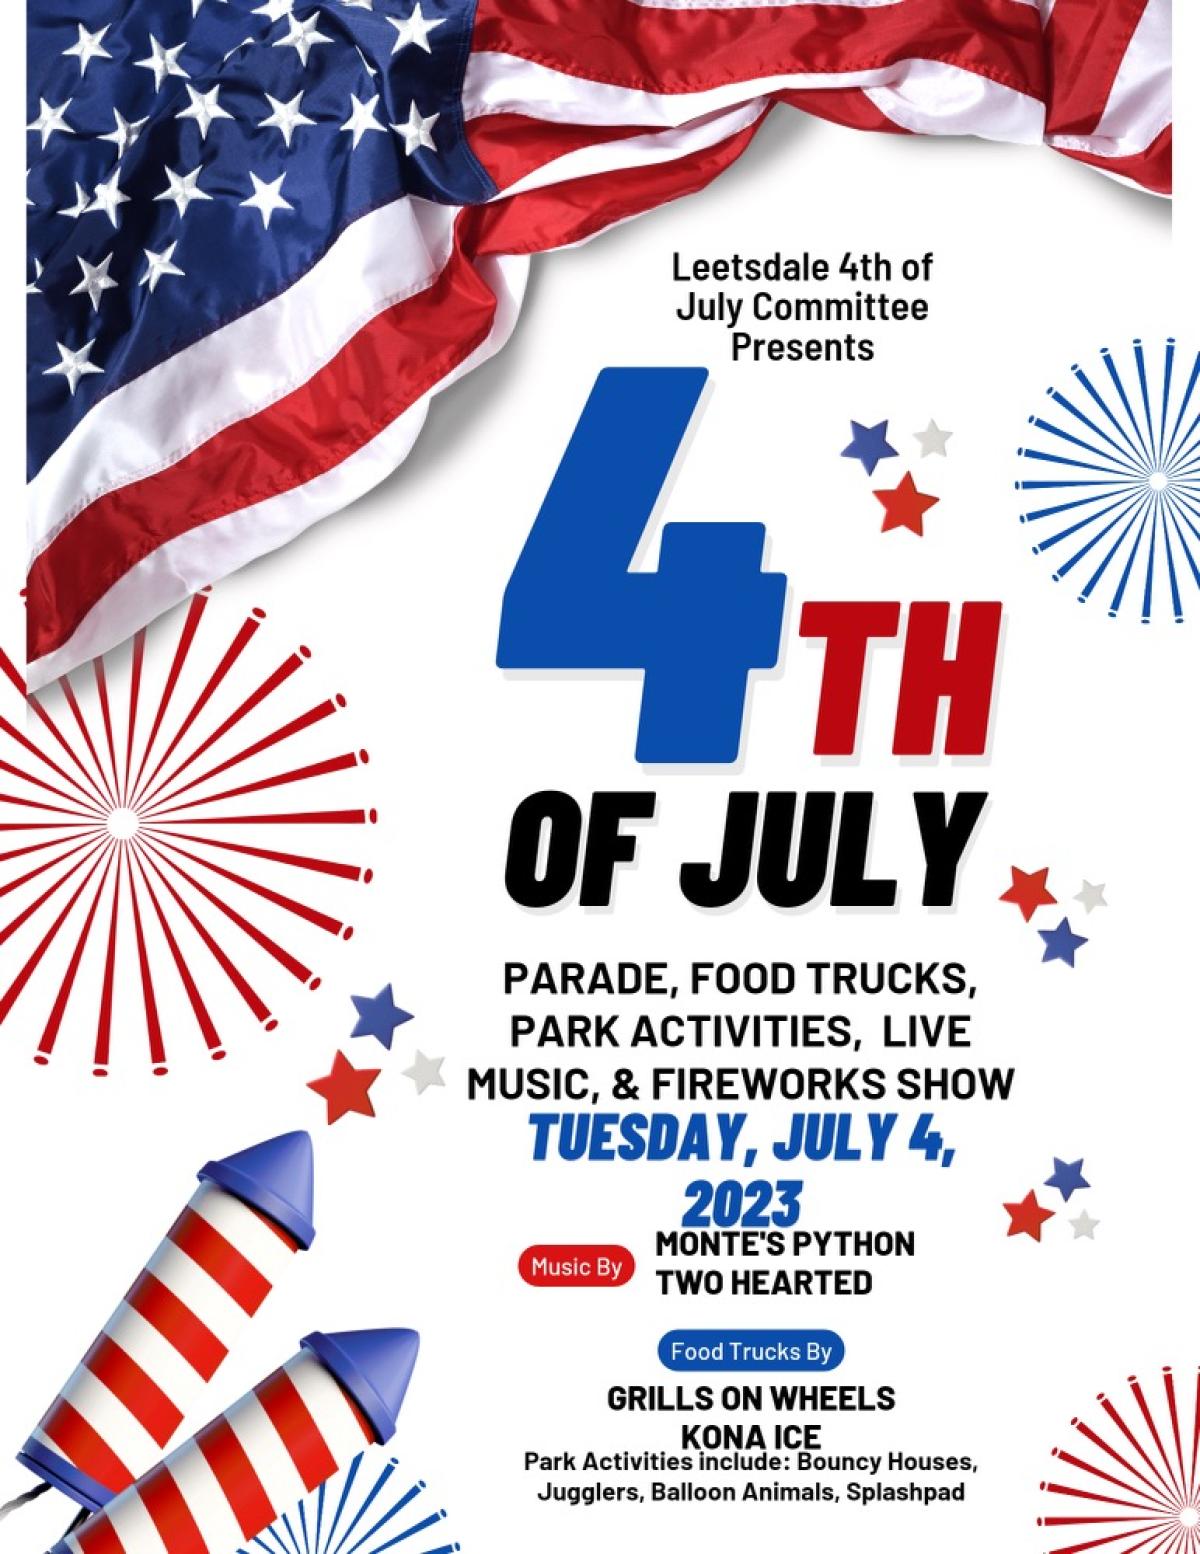 Please see the attached flyer for details on the upcoming 4th of July Celebration.